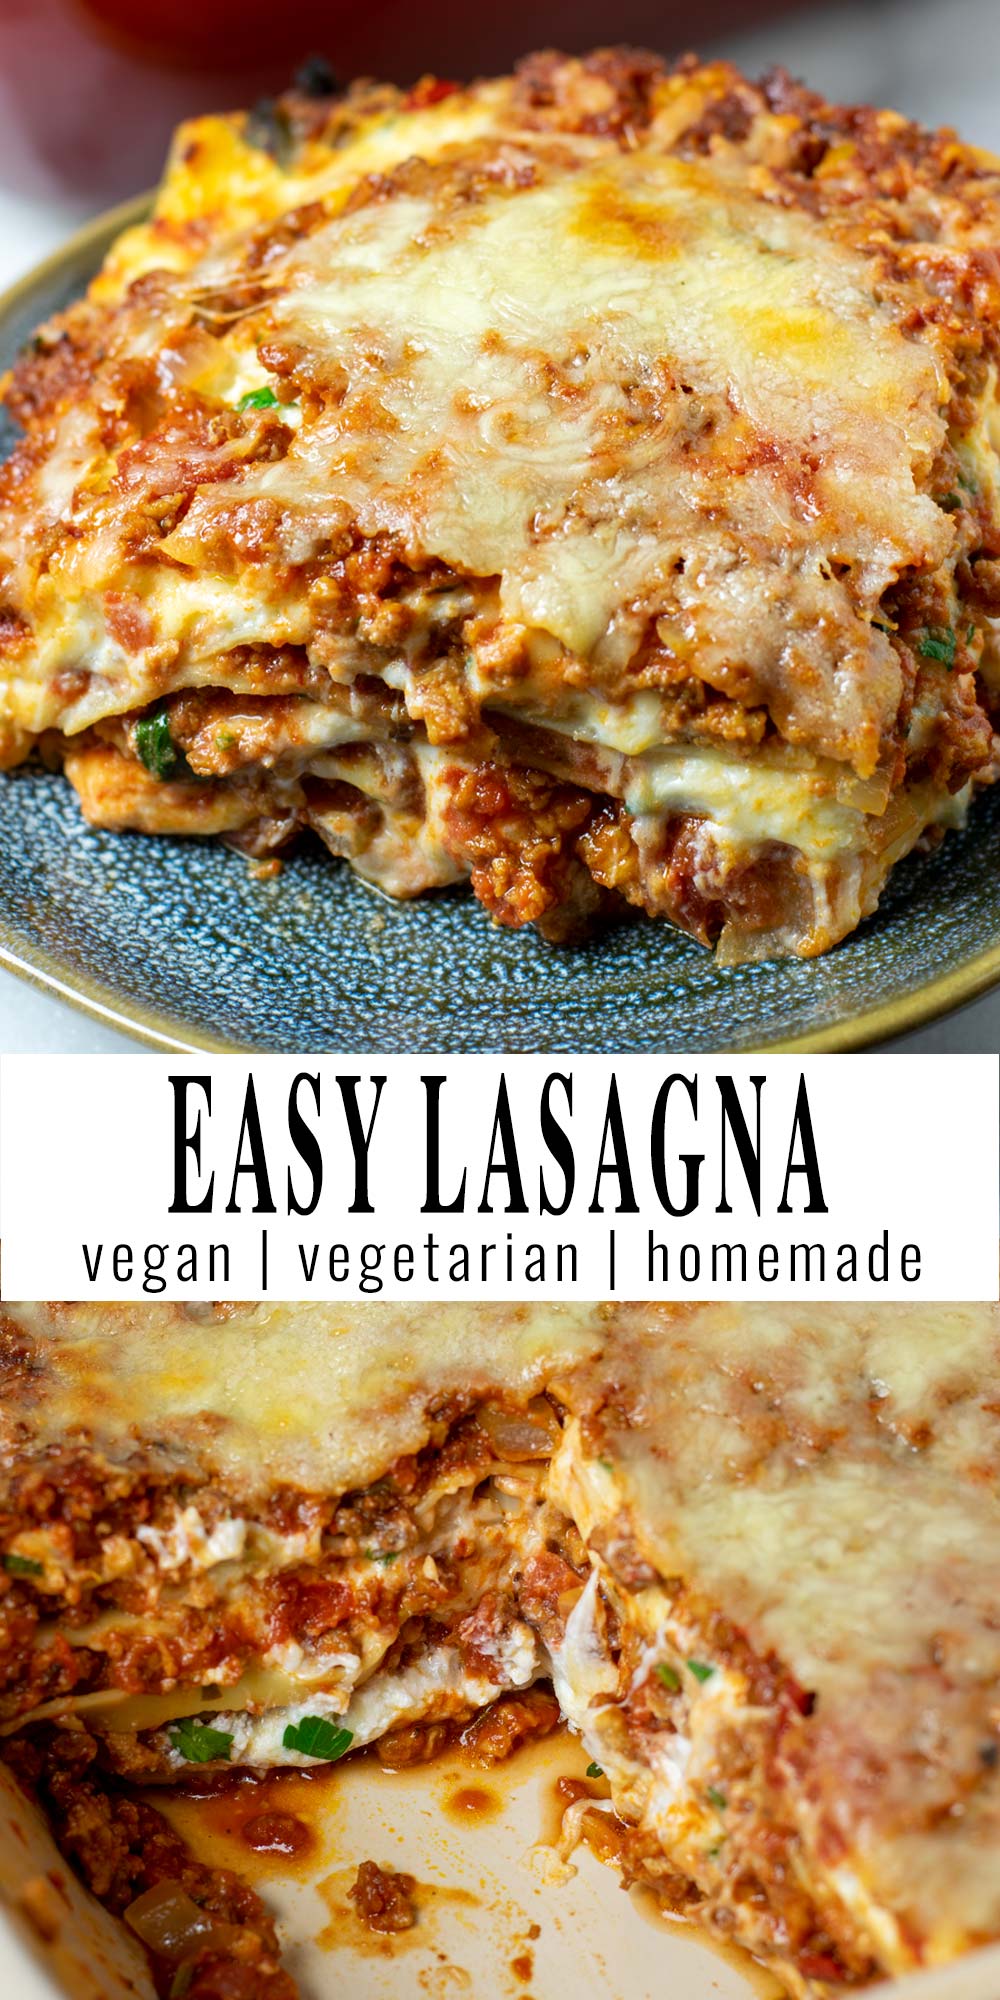 Collage of two pictures of the Easy Homemade Lasagna with recipe title text.